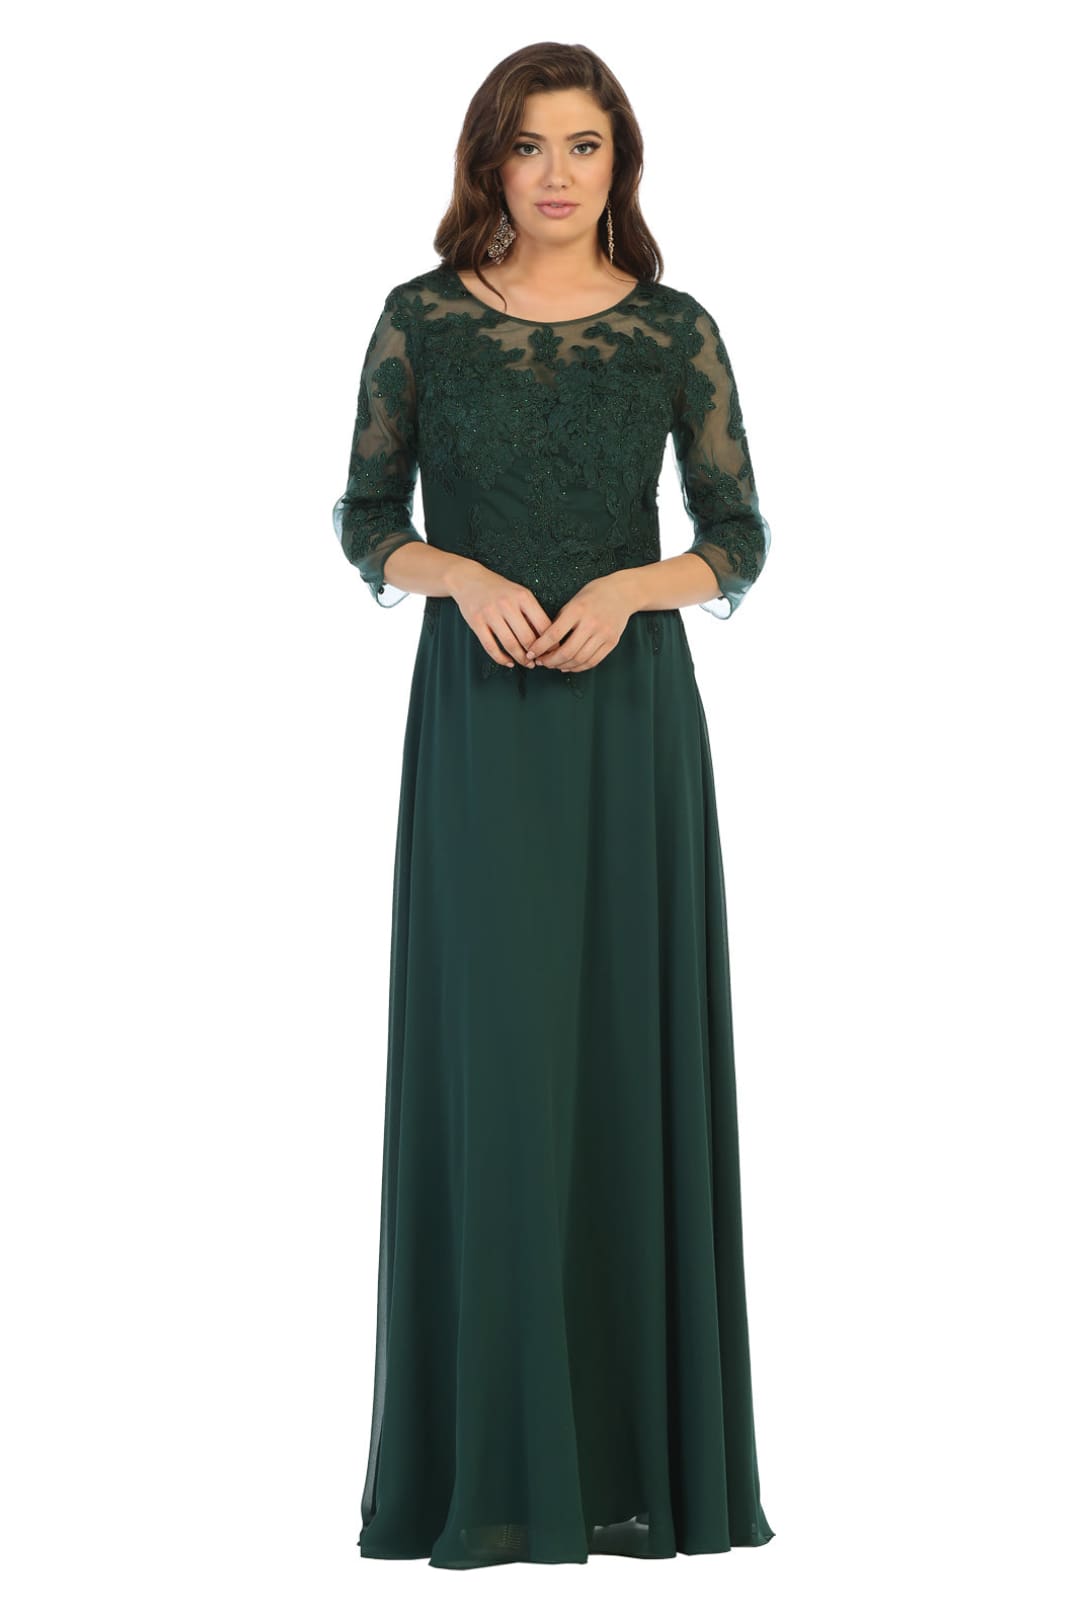 May Queen MQ1637 3/4 Sleeves Plus Size Mother Of The Bride Dress - HUNTER GREEN / L - Dress